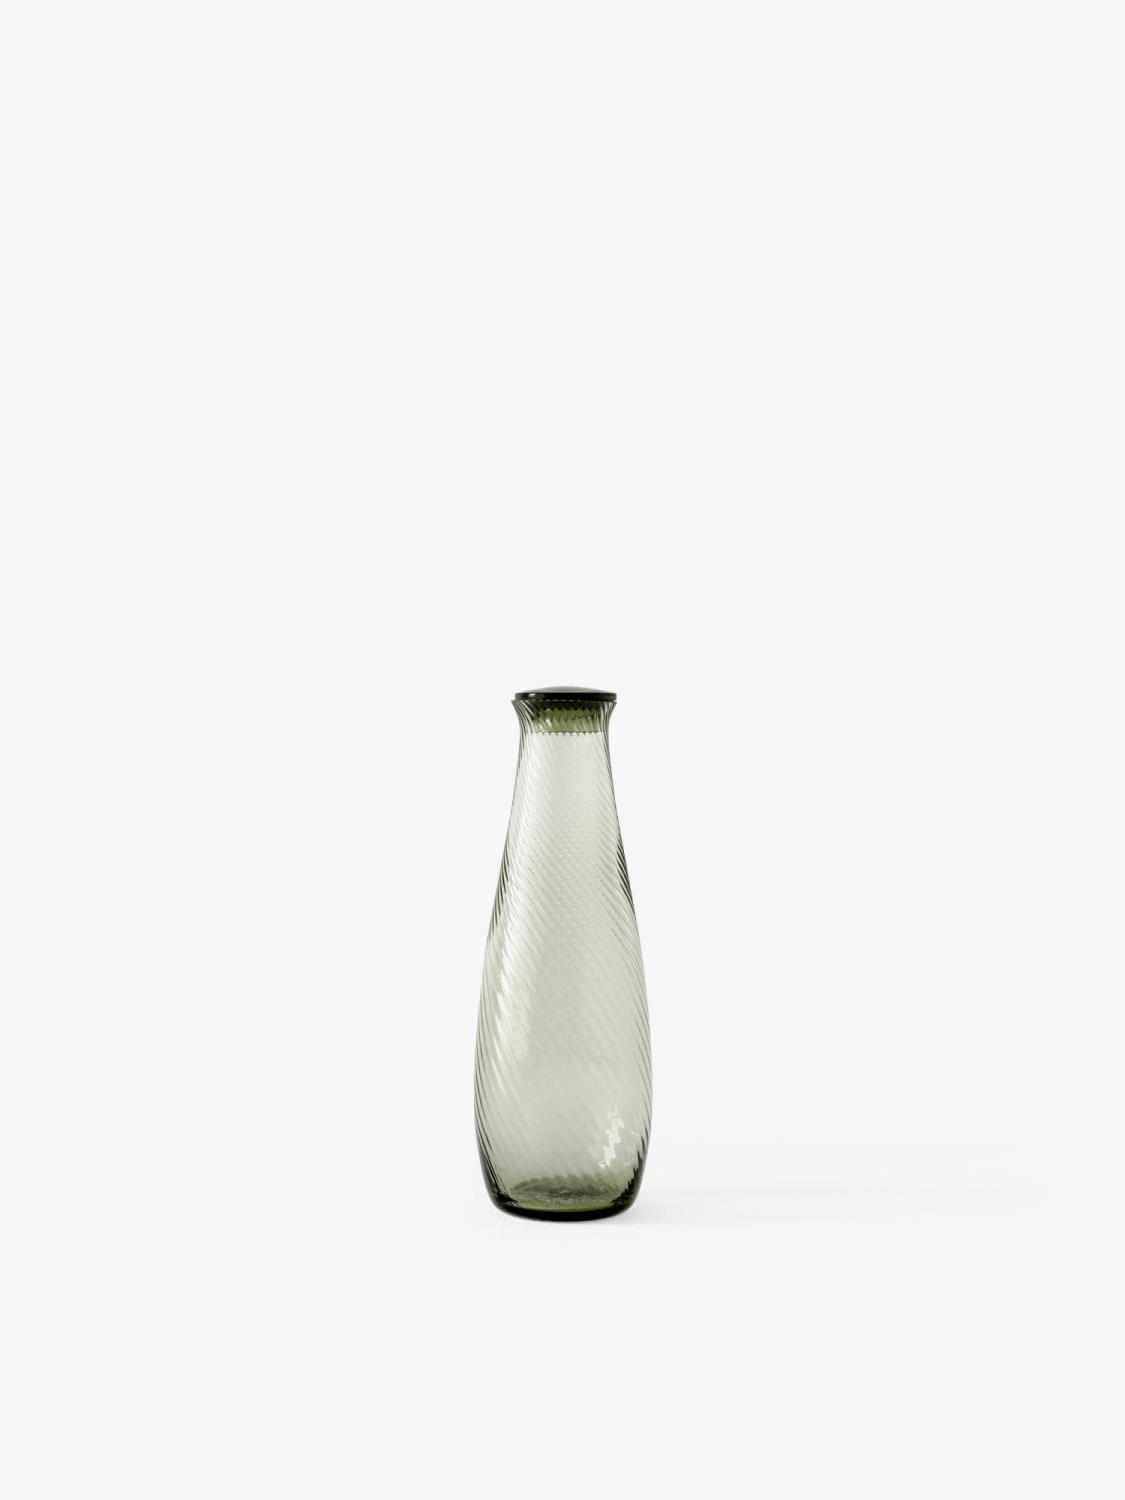 &Tradition - Collect Carafe SC62 - Moss 0,8 liter